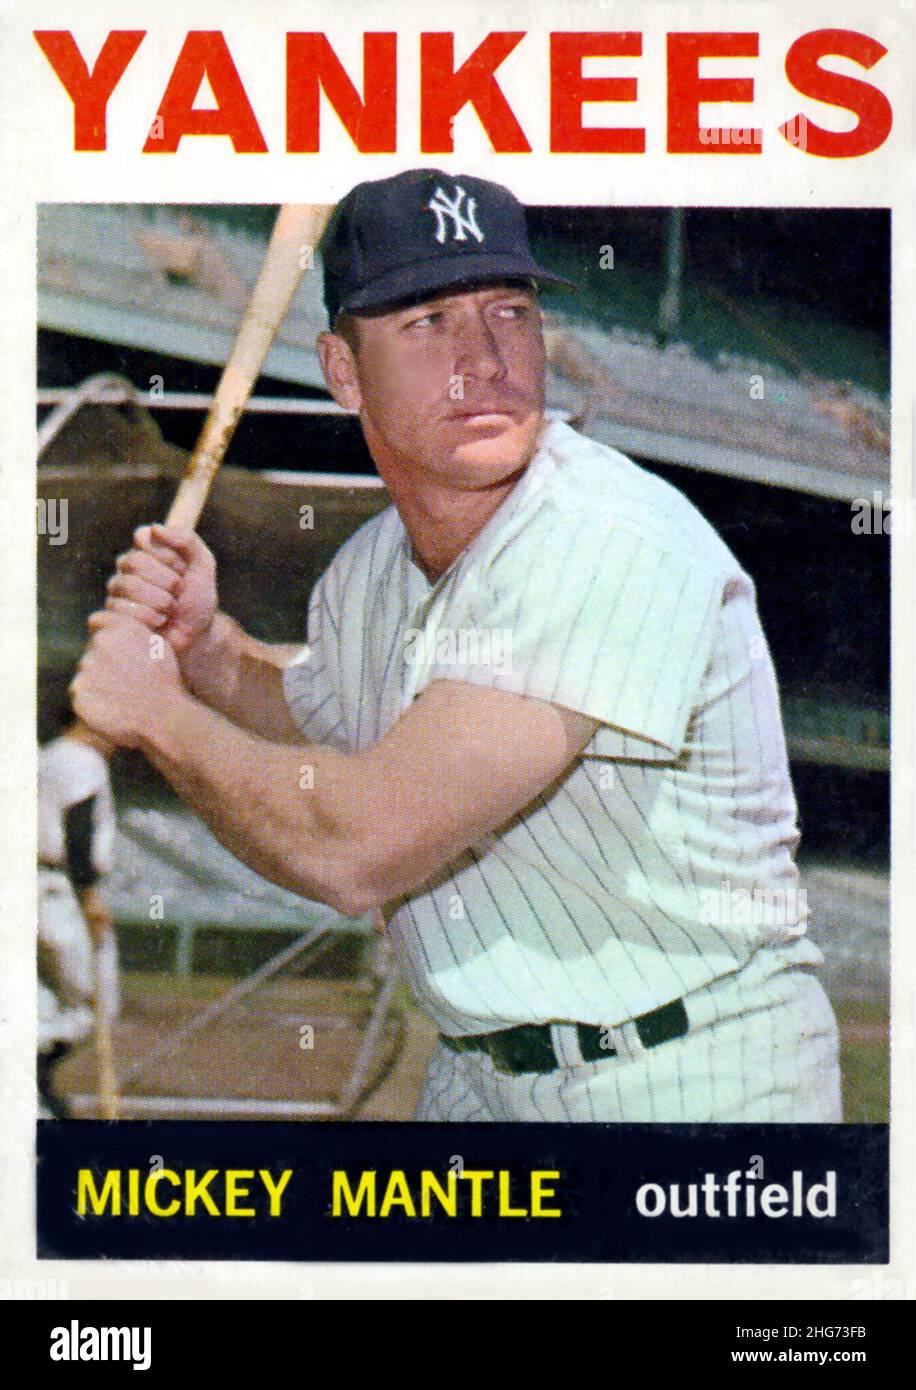 A 1964 Topps baseball card depicts Hall of Famer Mickey Mantle with the New York Yankees. Stock Photo